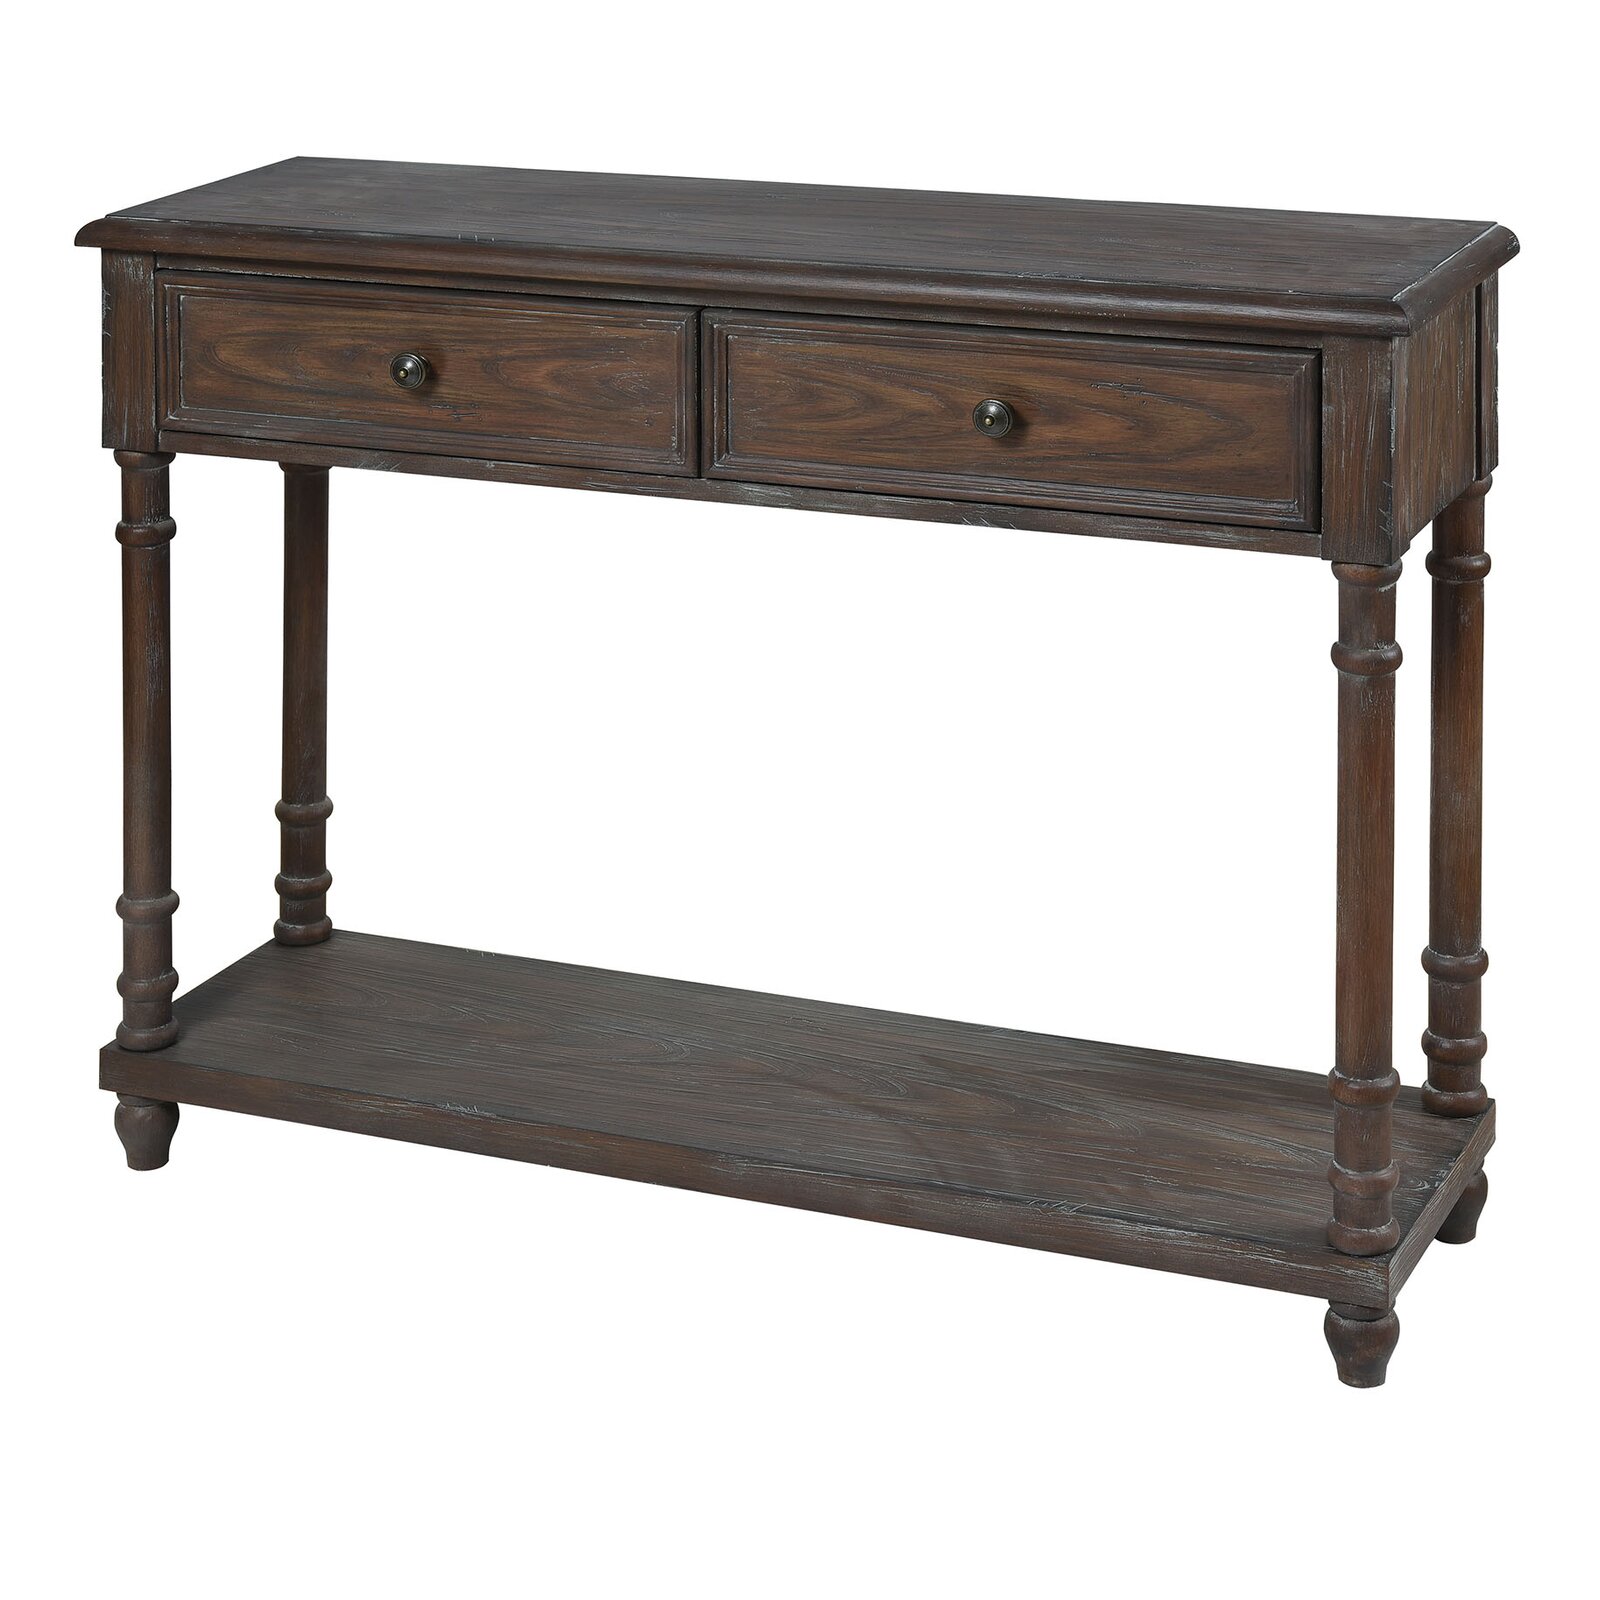 Gracie Oaks Pangle 42" Solid Wood Console Table